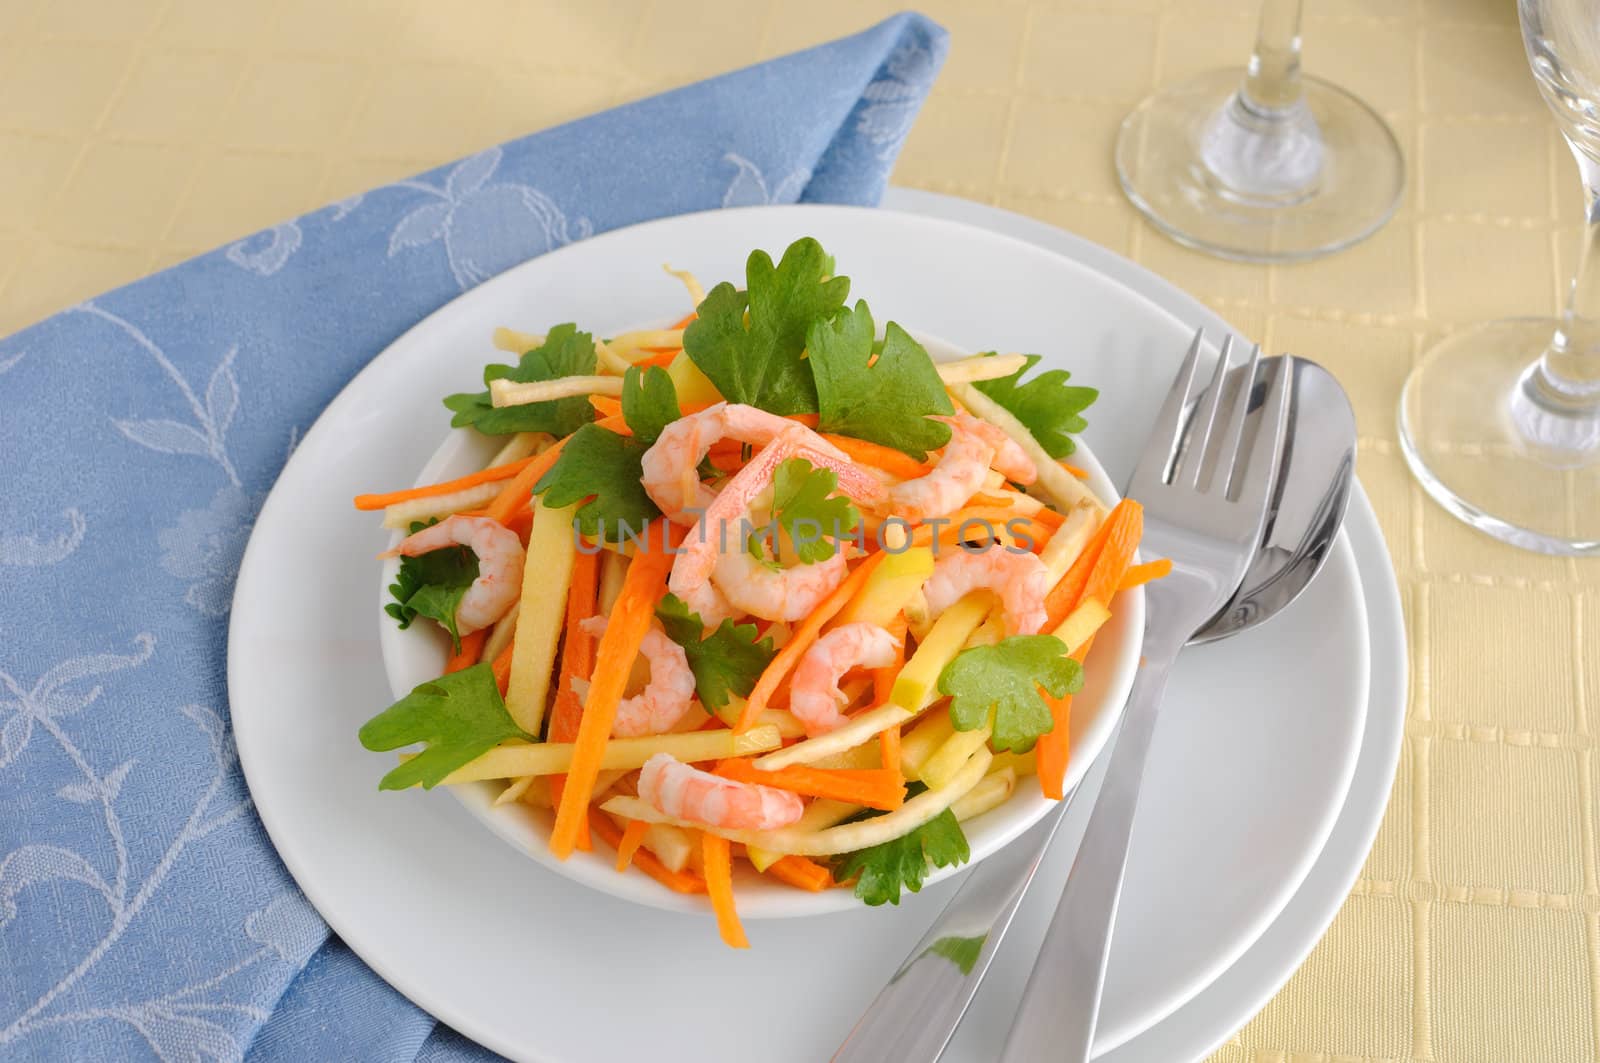 Salad of celery root and leaves with carrots, apples and shrimp